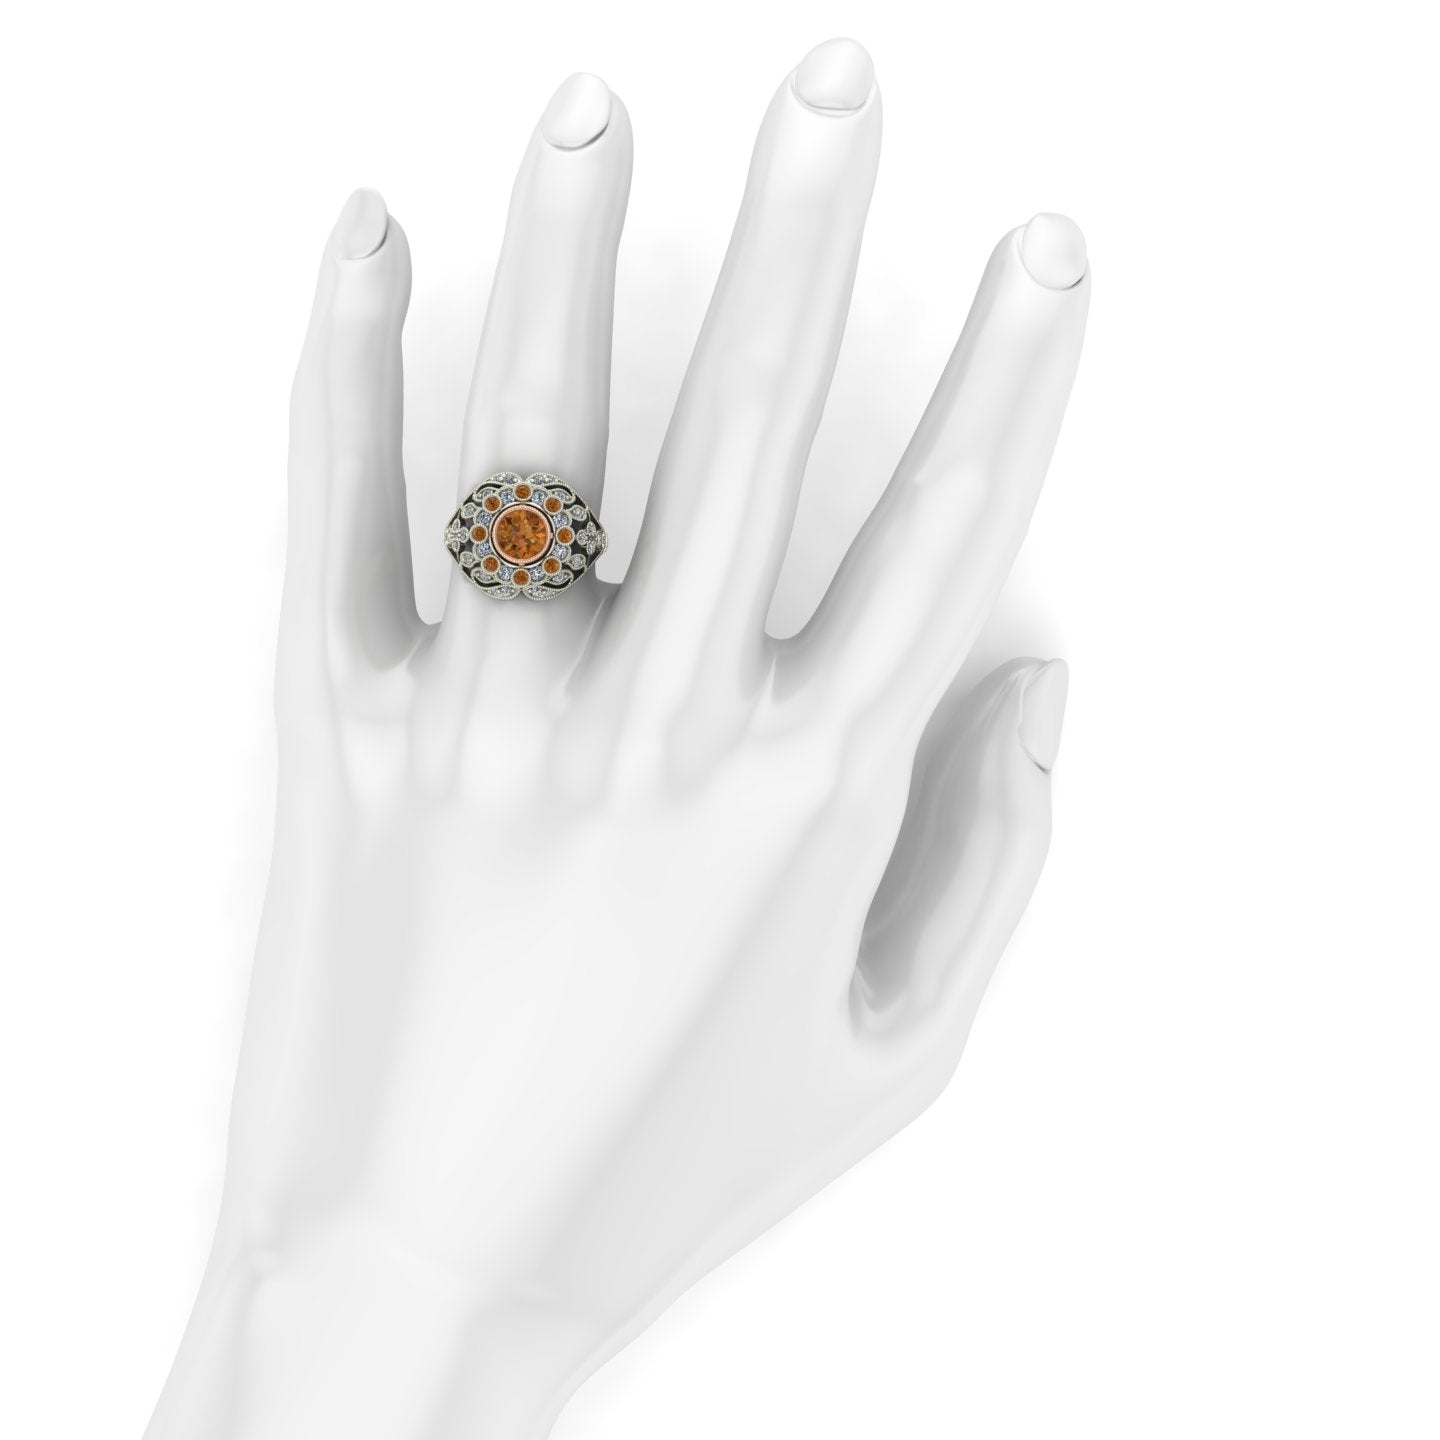 bezel set cognac and white diamond two tone ring in 14k rose and white gold - Charles Babb Designs - on hand